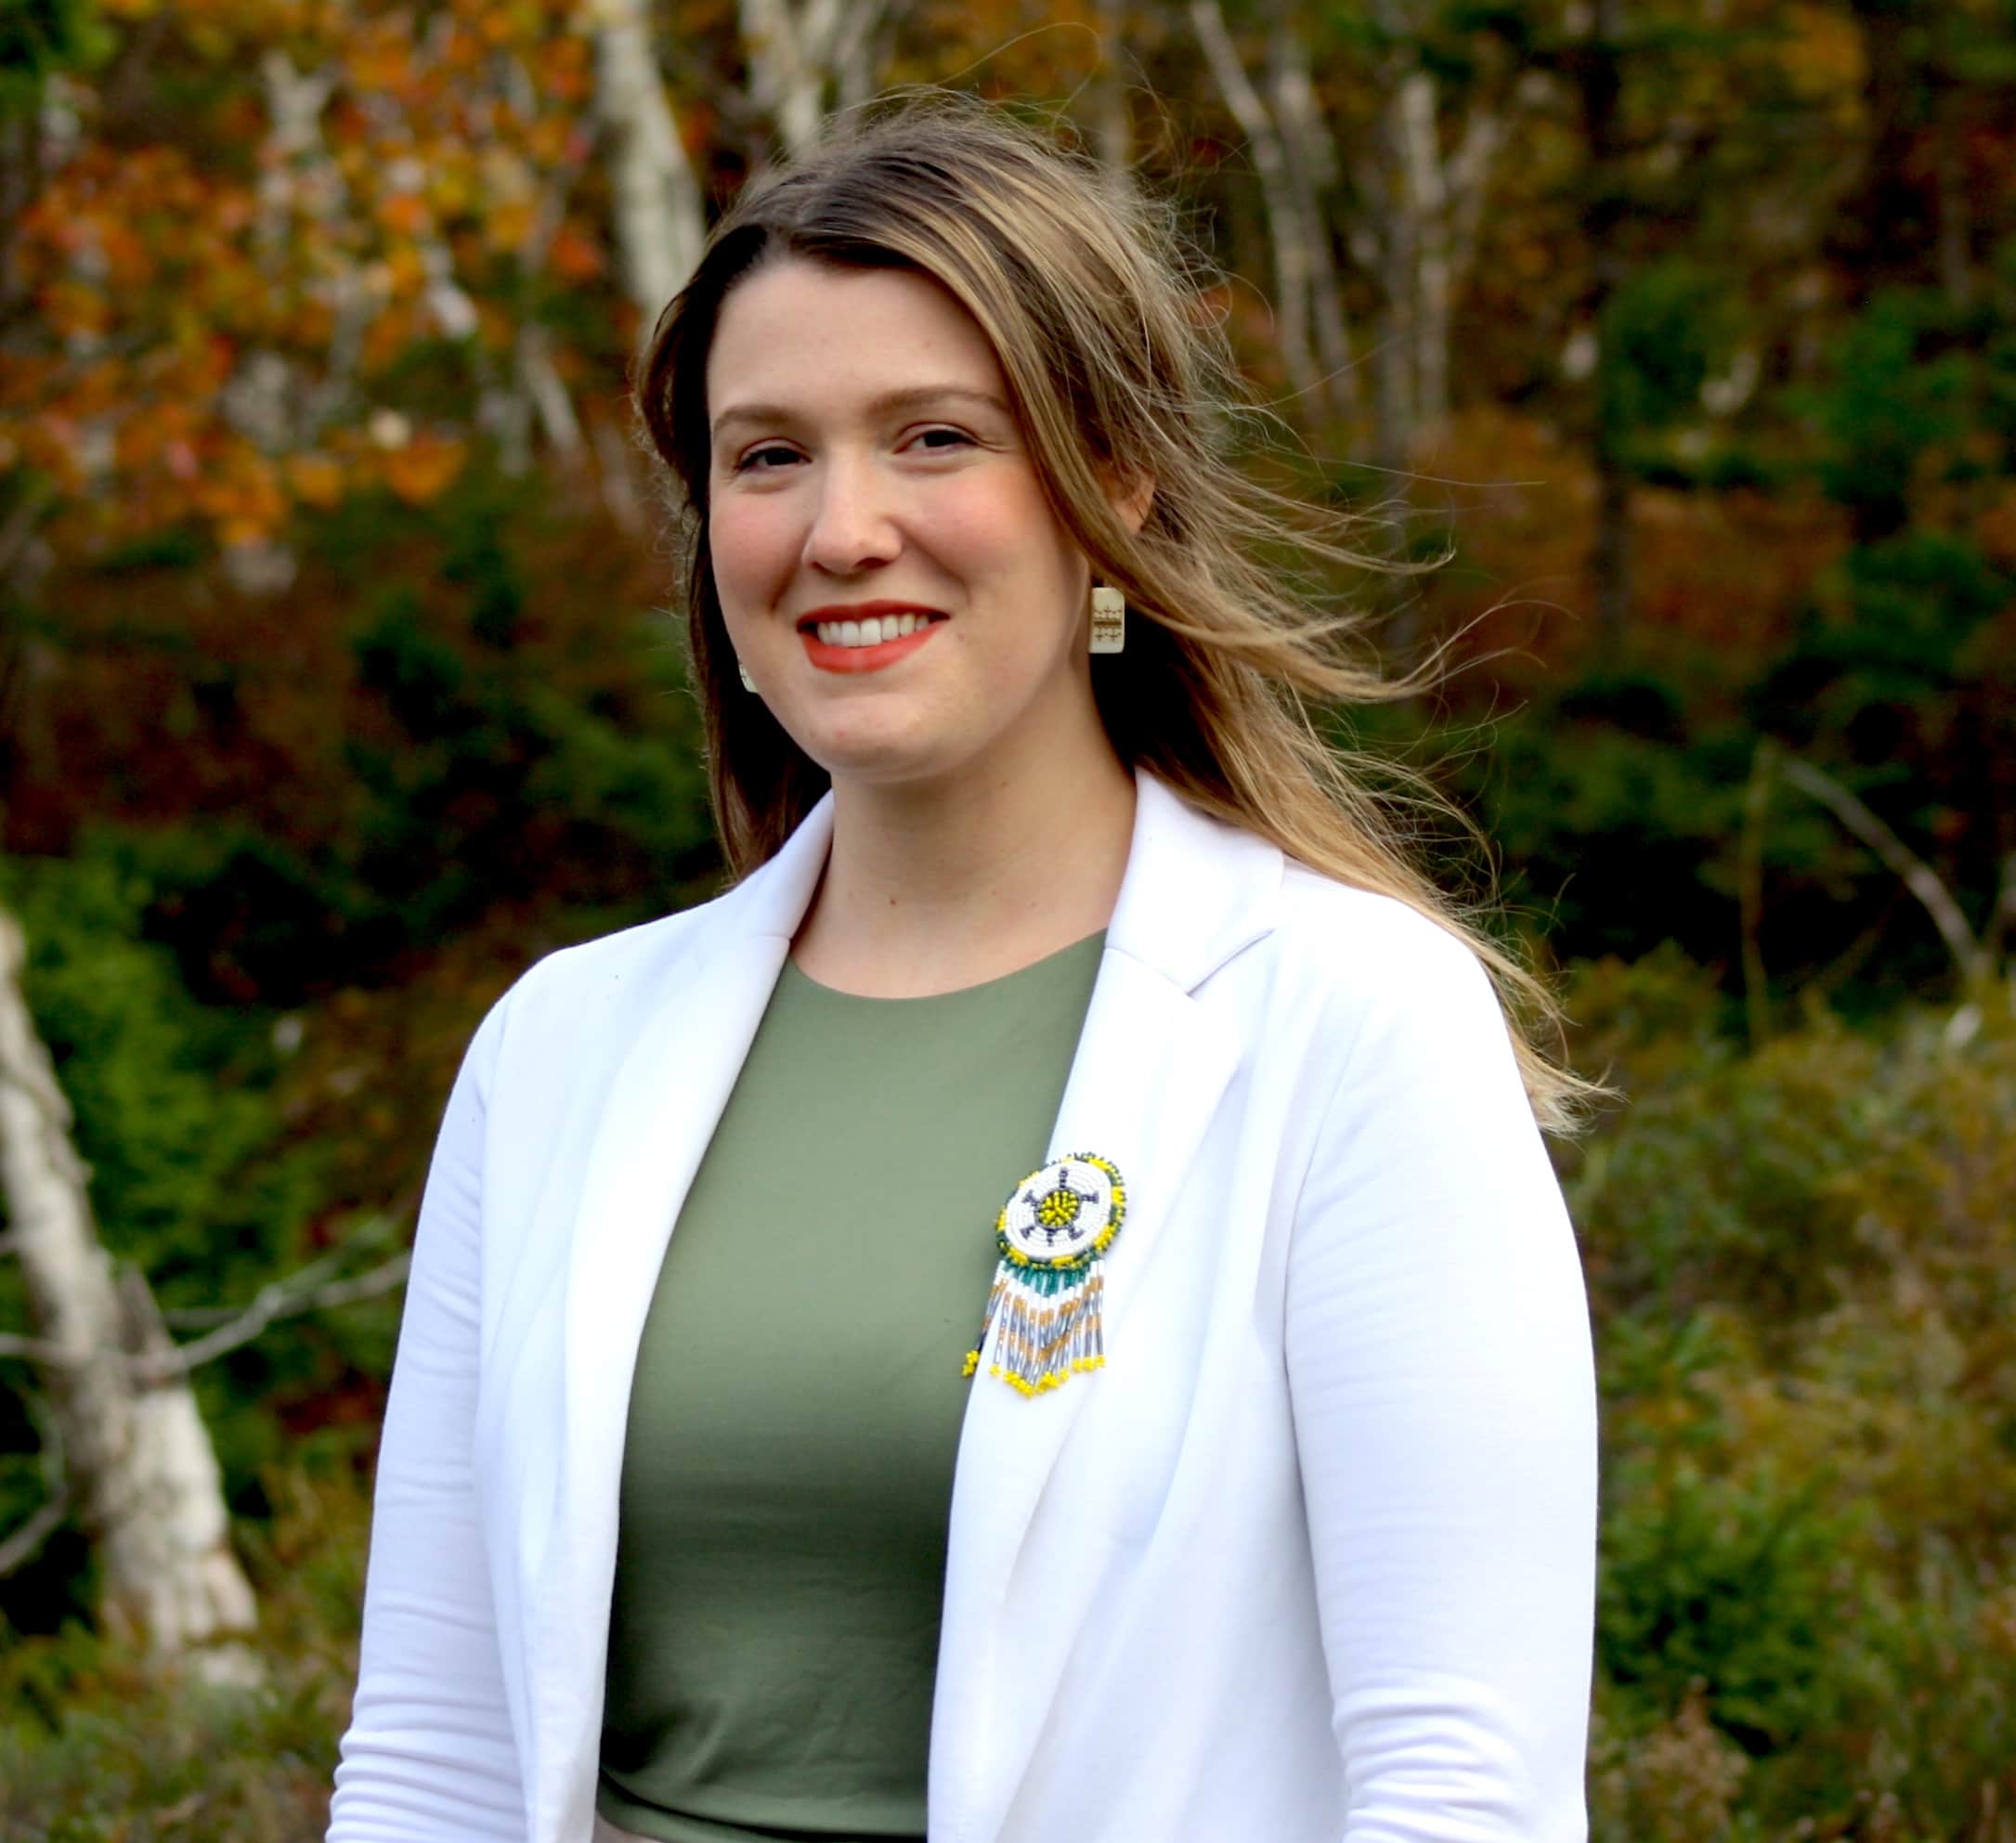 Chelsey Purdy, who has long light brown hair smiles for a photo while wearing a white blazer and green shirt underneath